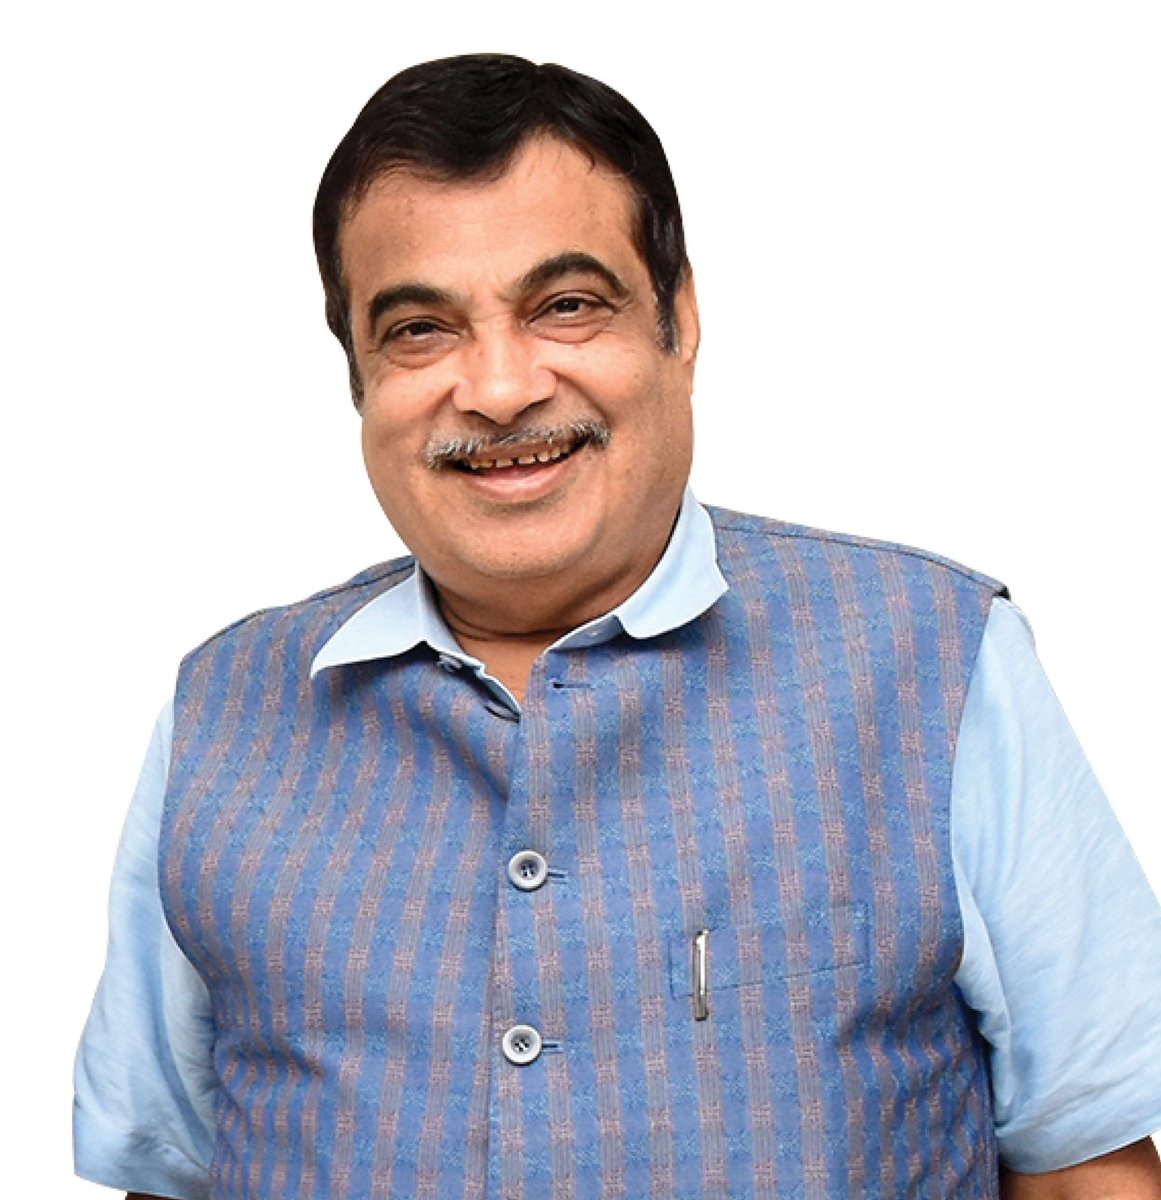 Extending warm birthday greetings to Union Minister of Road Transport & Highways, Sh Nitin Gadkari! May you be blessed with a long and healthy life. @nitin_gadkari